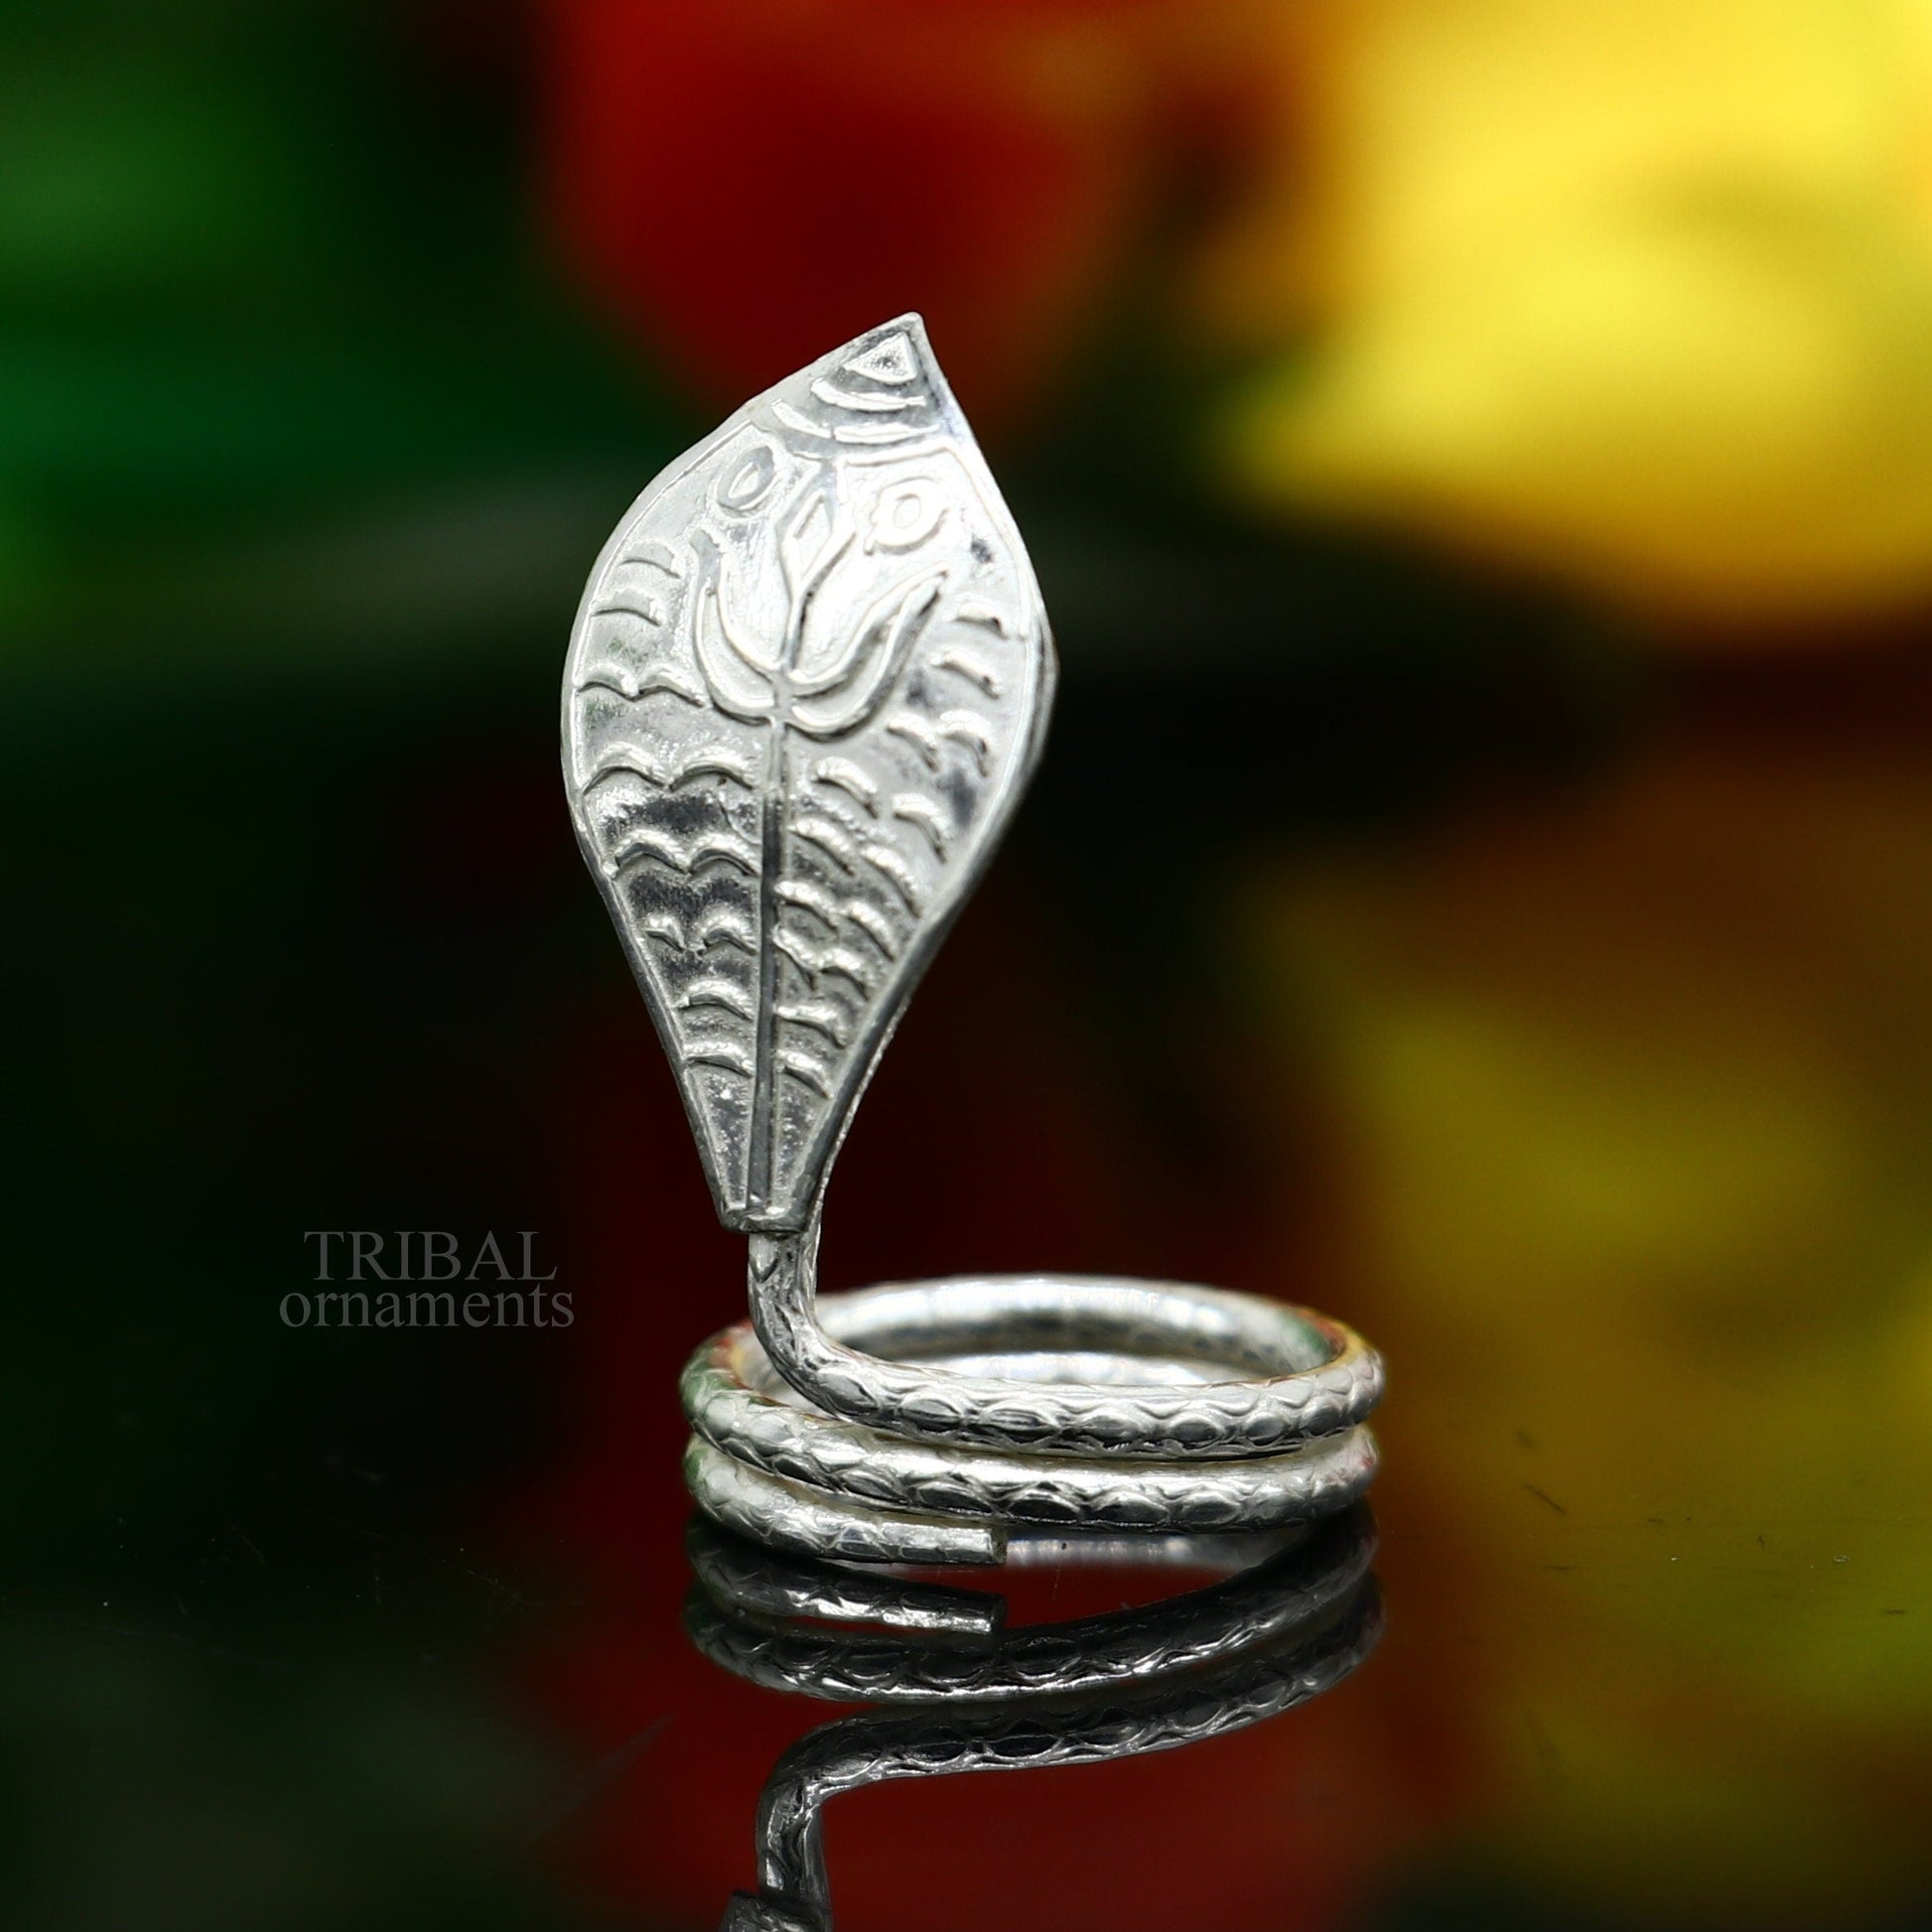 Solid sterling silver handmade fabulous vintage antique mini snake or shiva snake for puja or worshipping, solid Diwali puja article su702 - TRIBAL ORNAMENTS